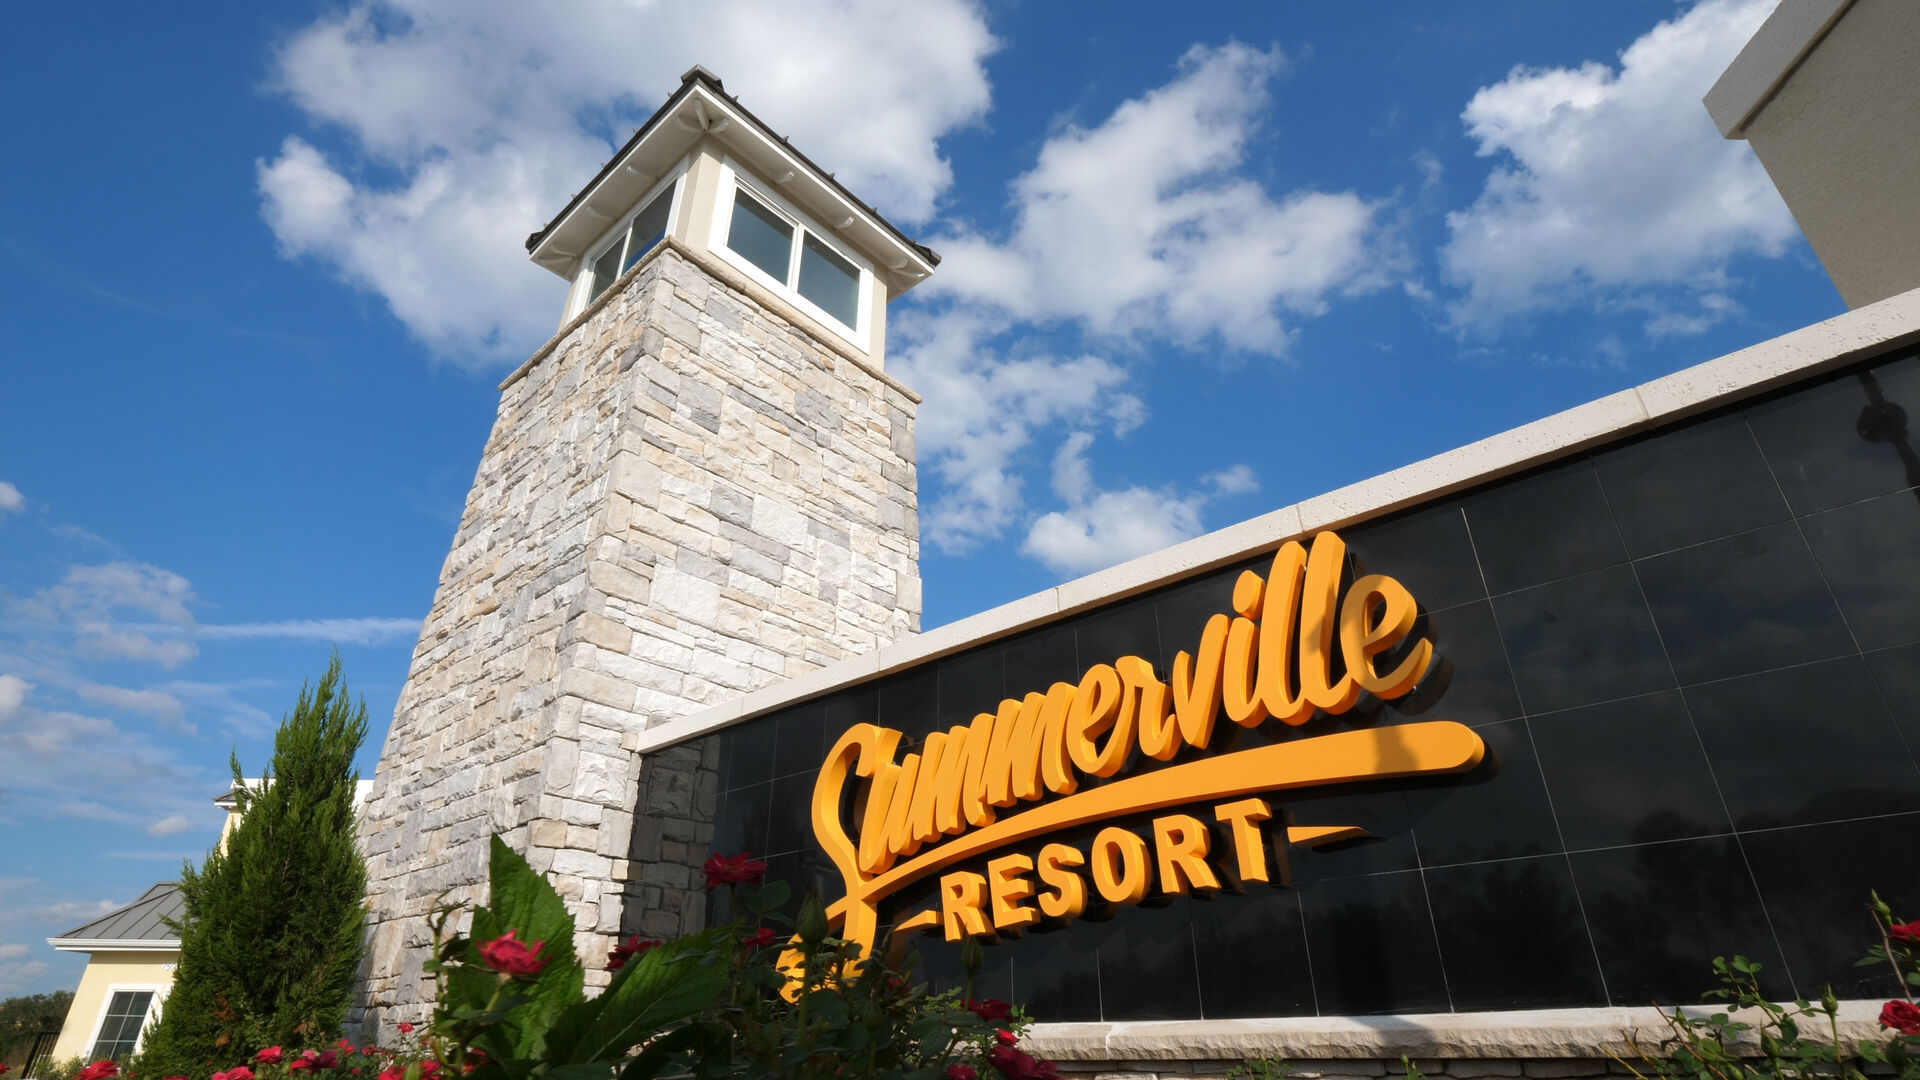 We are at Summerville Resort. One of the closest to Disneyworld!